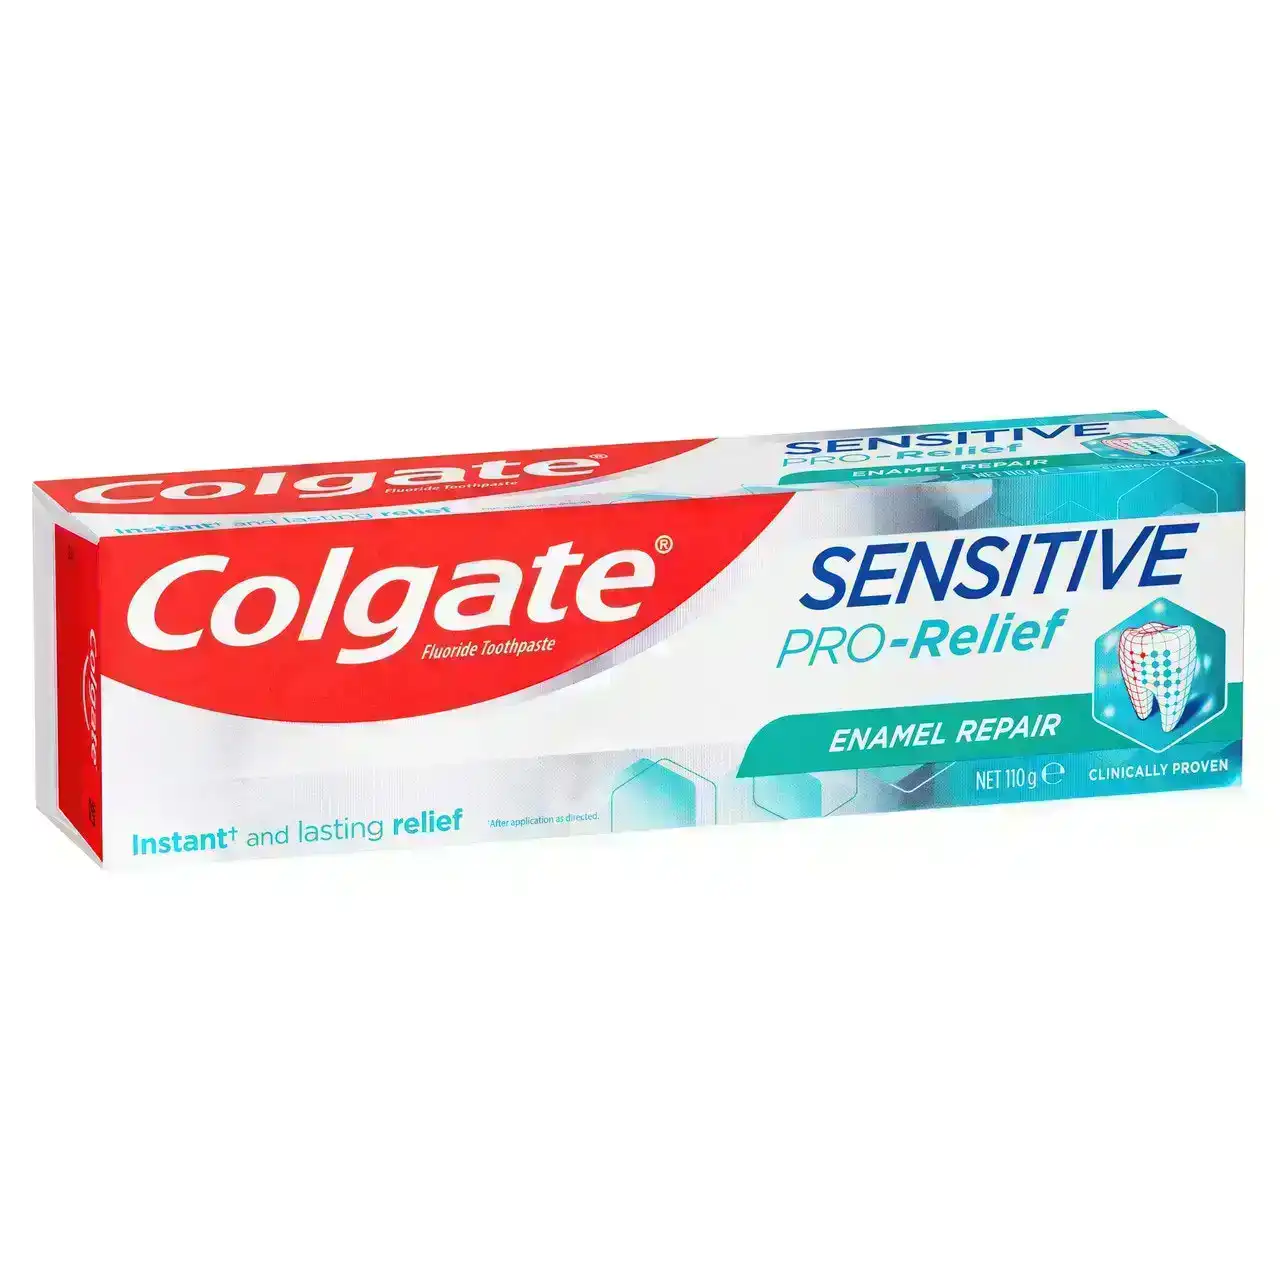 Colgate Sensitive Pro-Relief Enamel Repair Toothpaste, 110g, Clinically Proven Sensitive Teeth Pain Relief